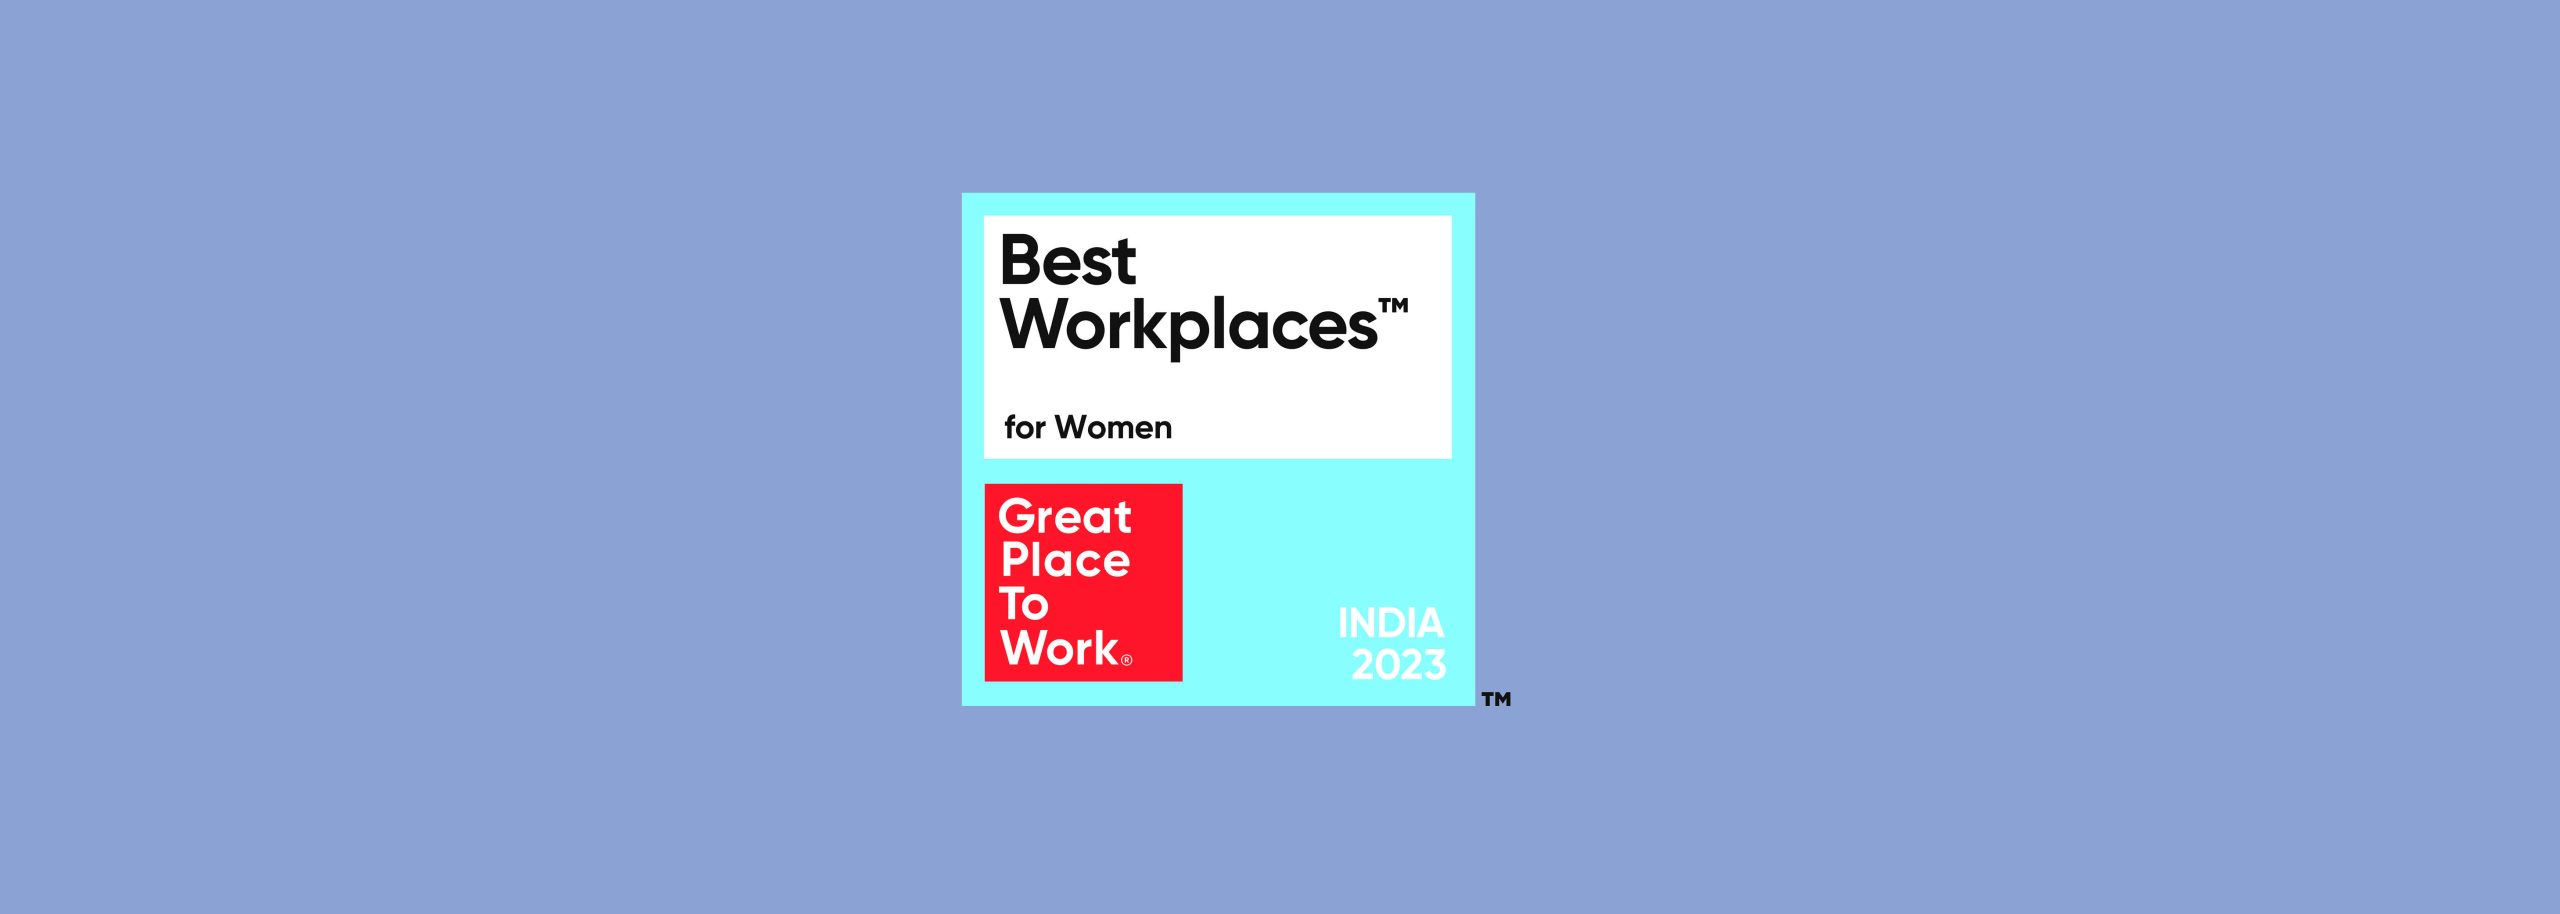 GPTW - Best Workplaces for Woman - India 1